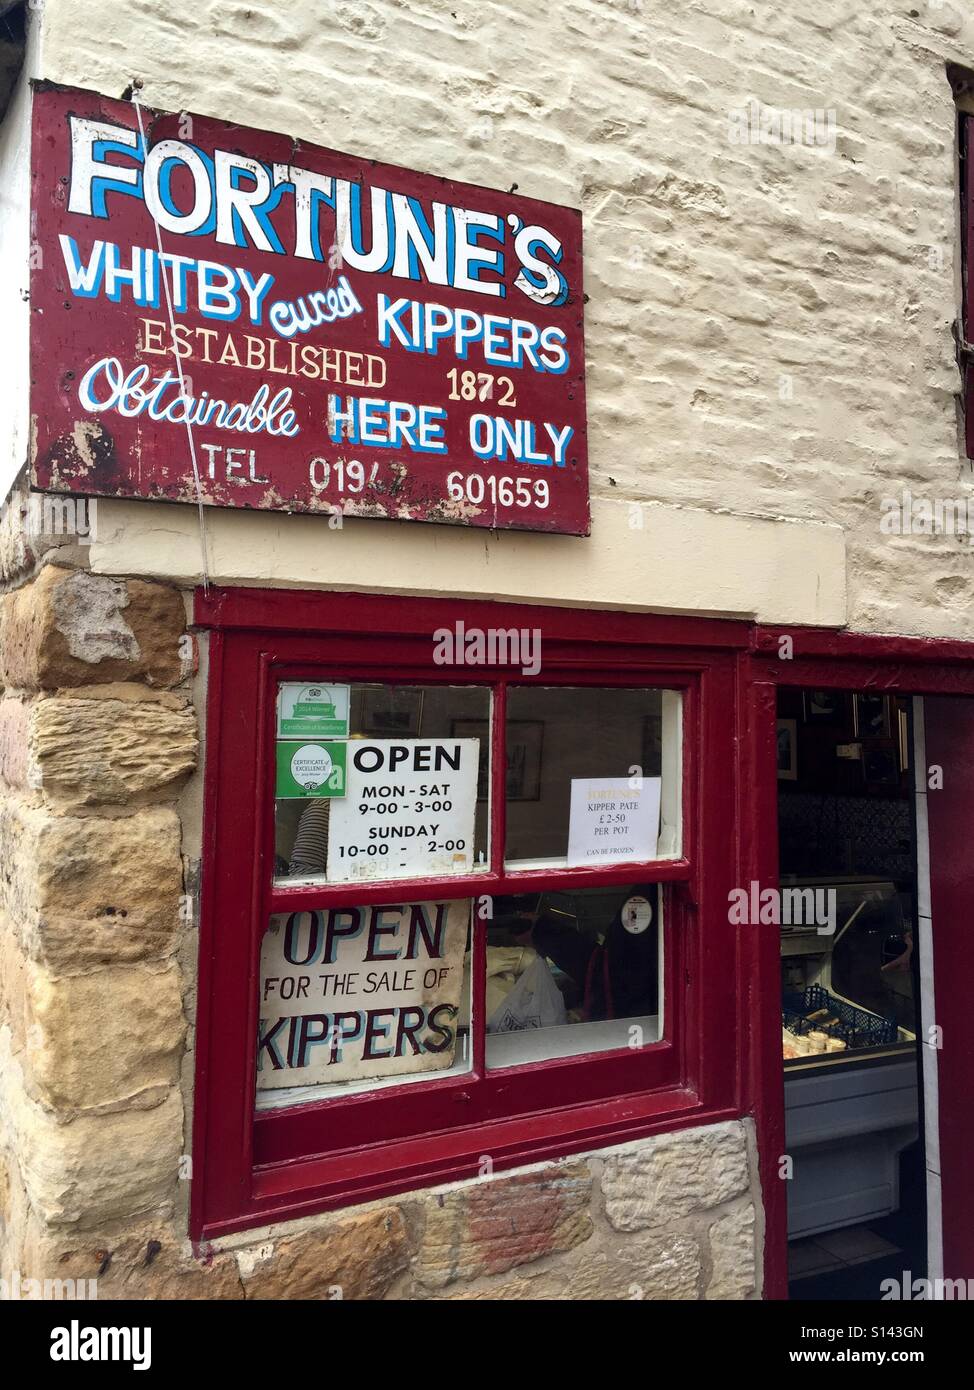 The famous 'Fortunes Whitby cured kippers' shop on Henrietta Street in Whitby, North Yorkshire, England. Stock Photo